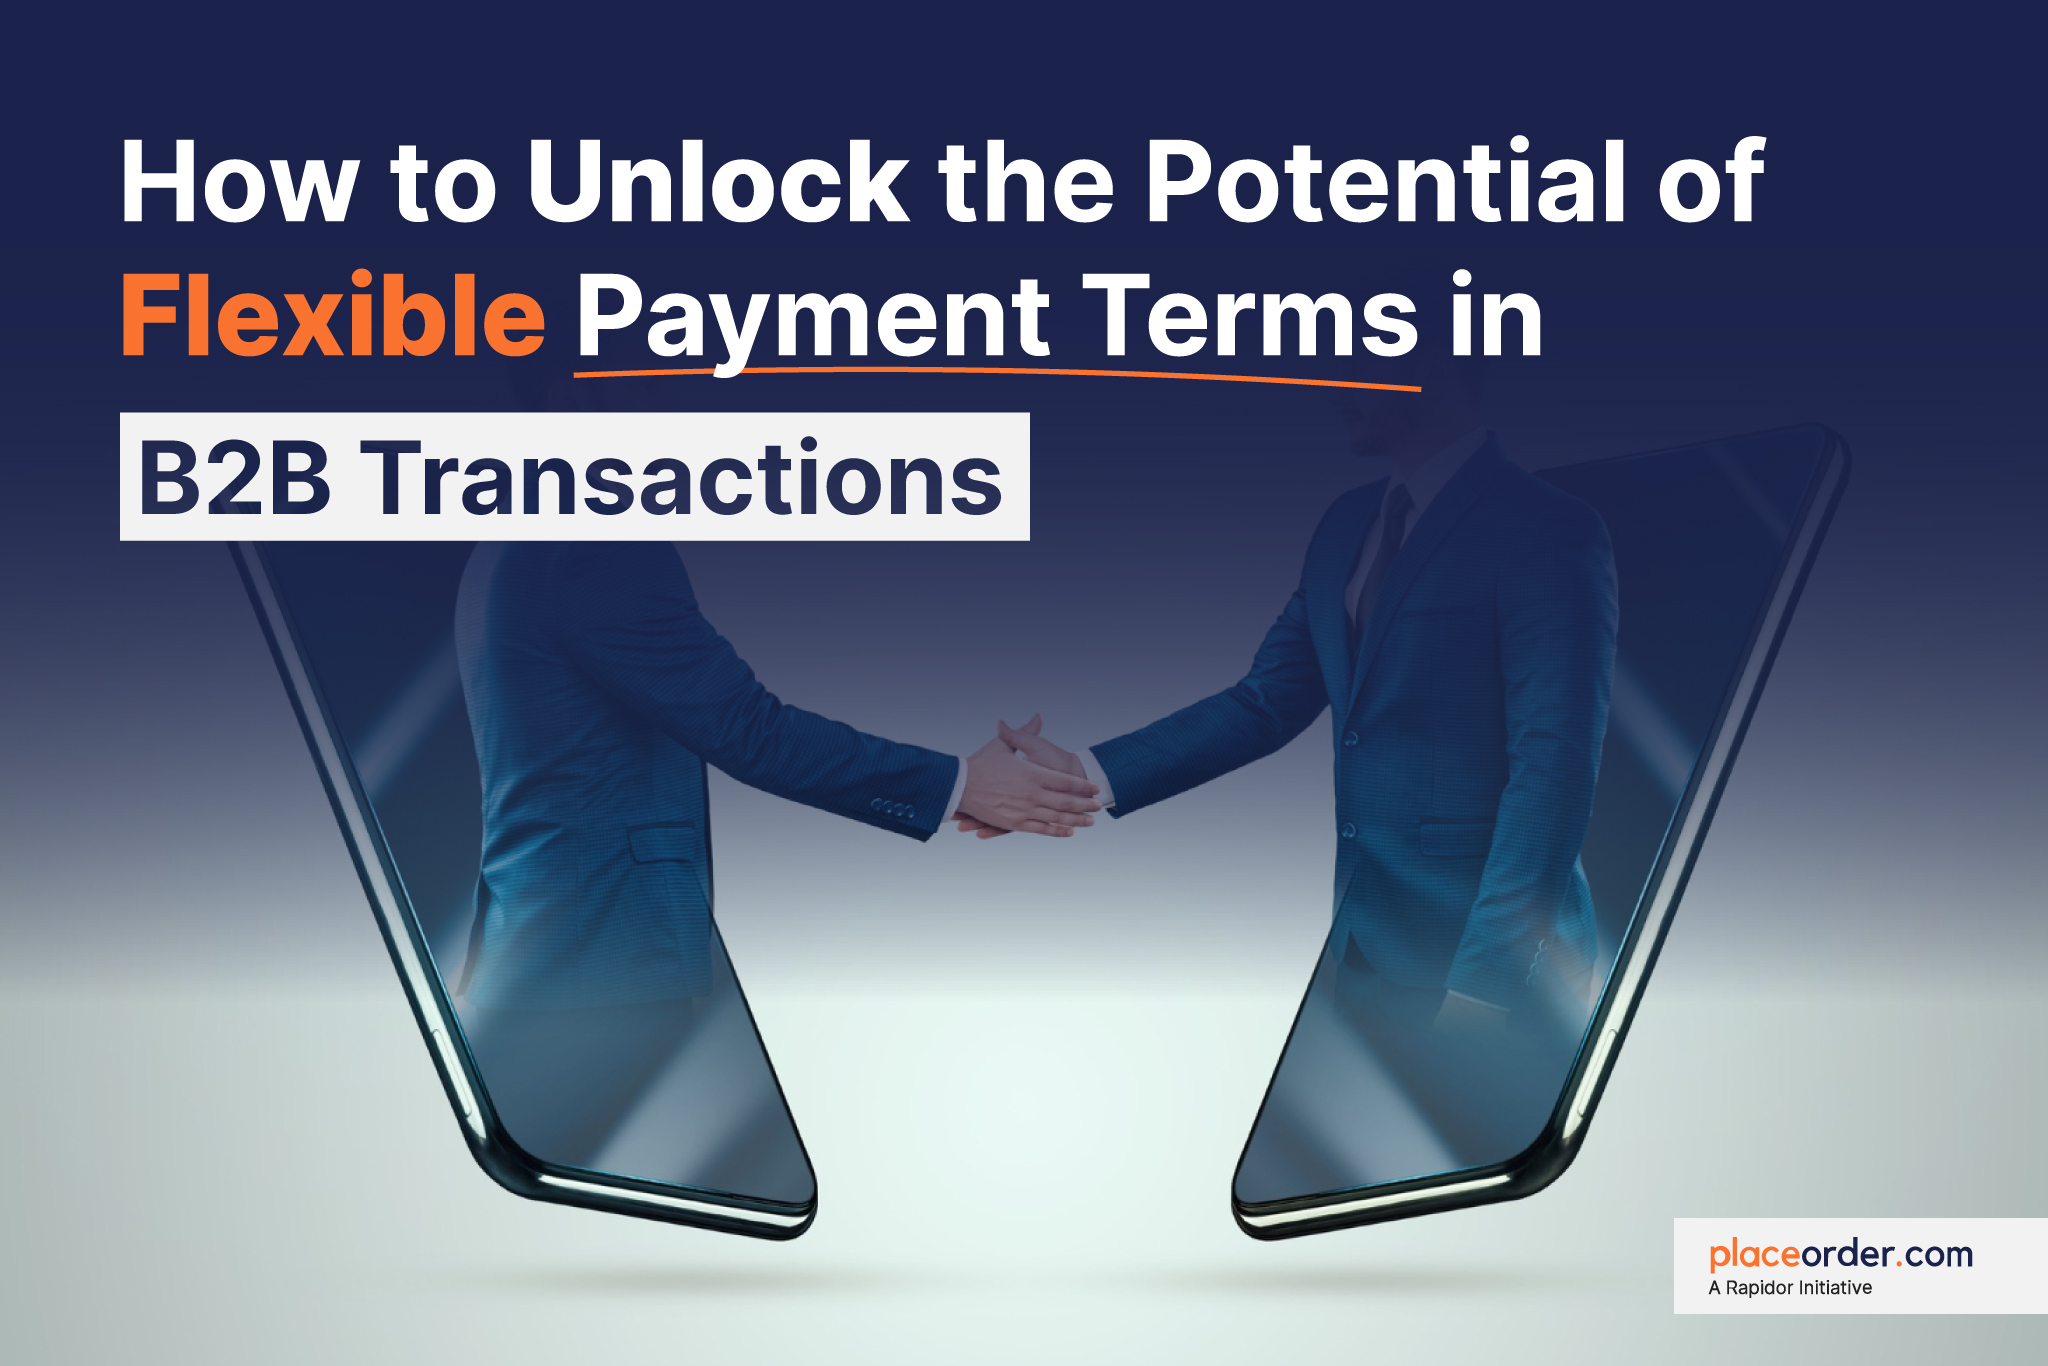 Flexible Payment Terms in B2B Transactions